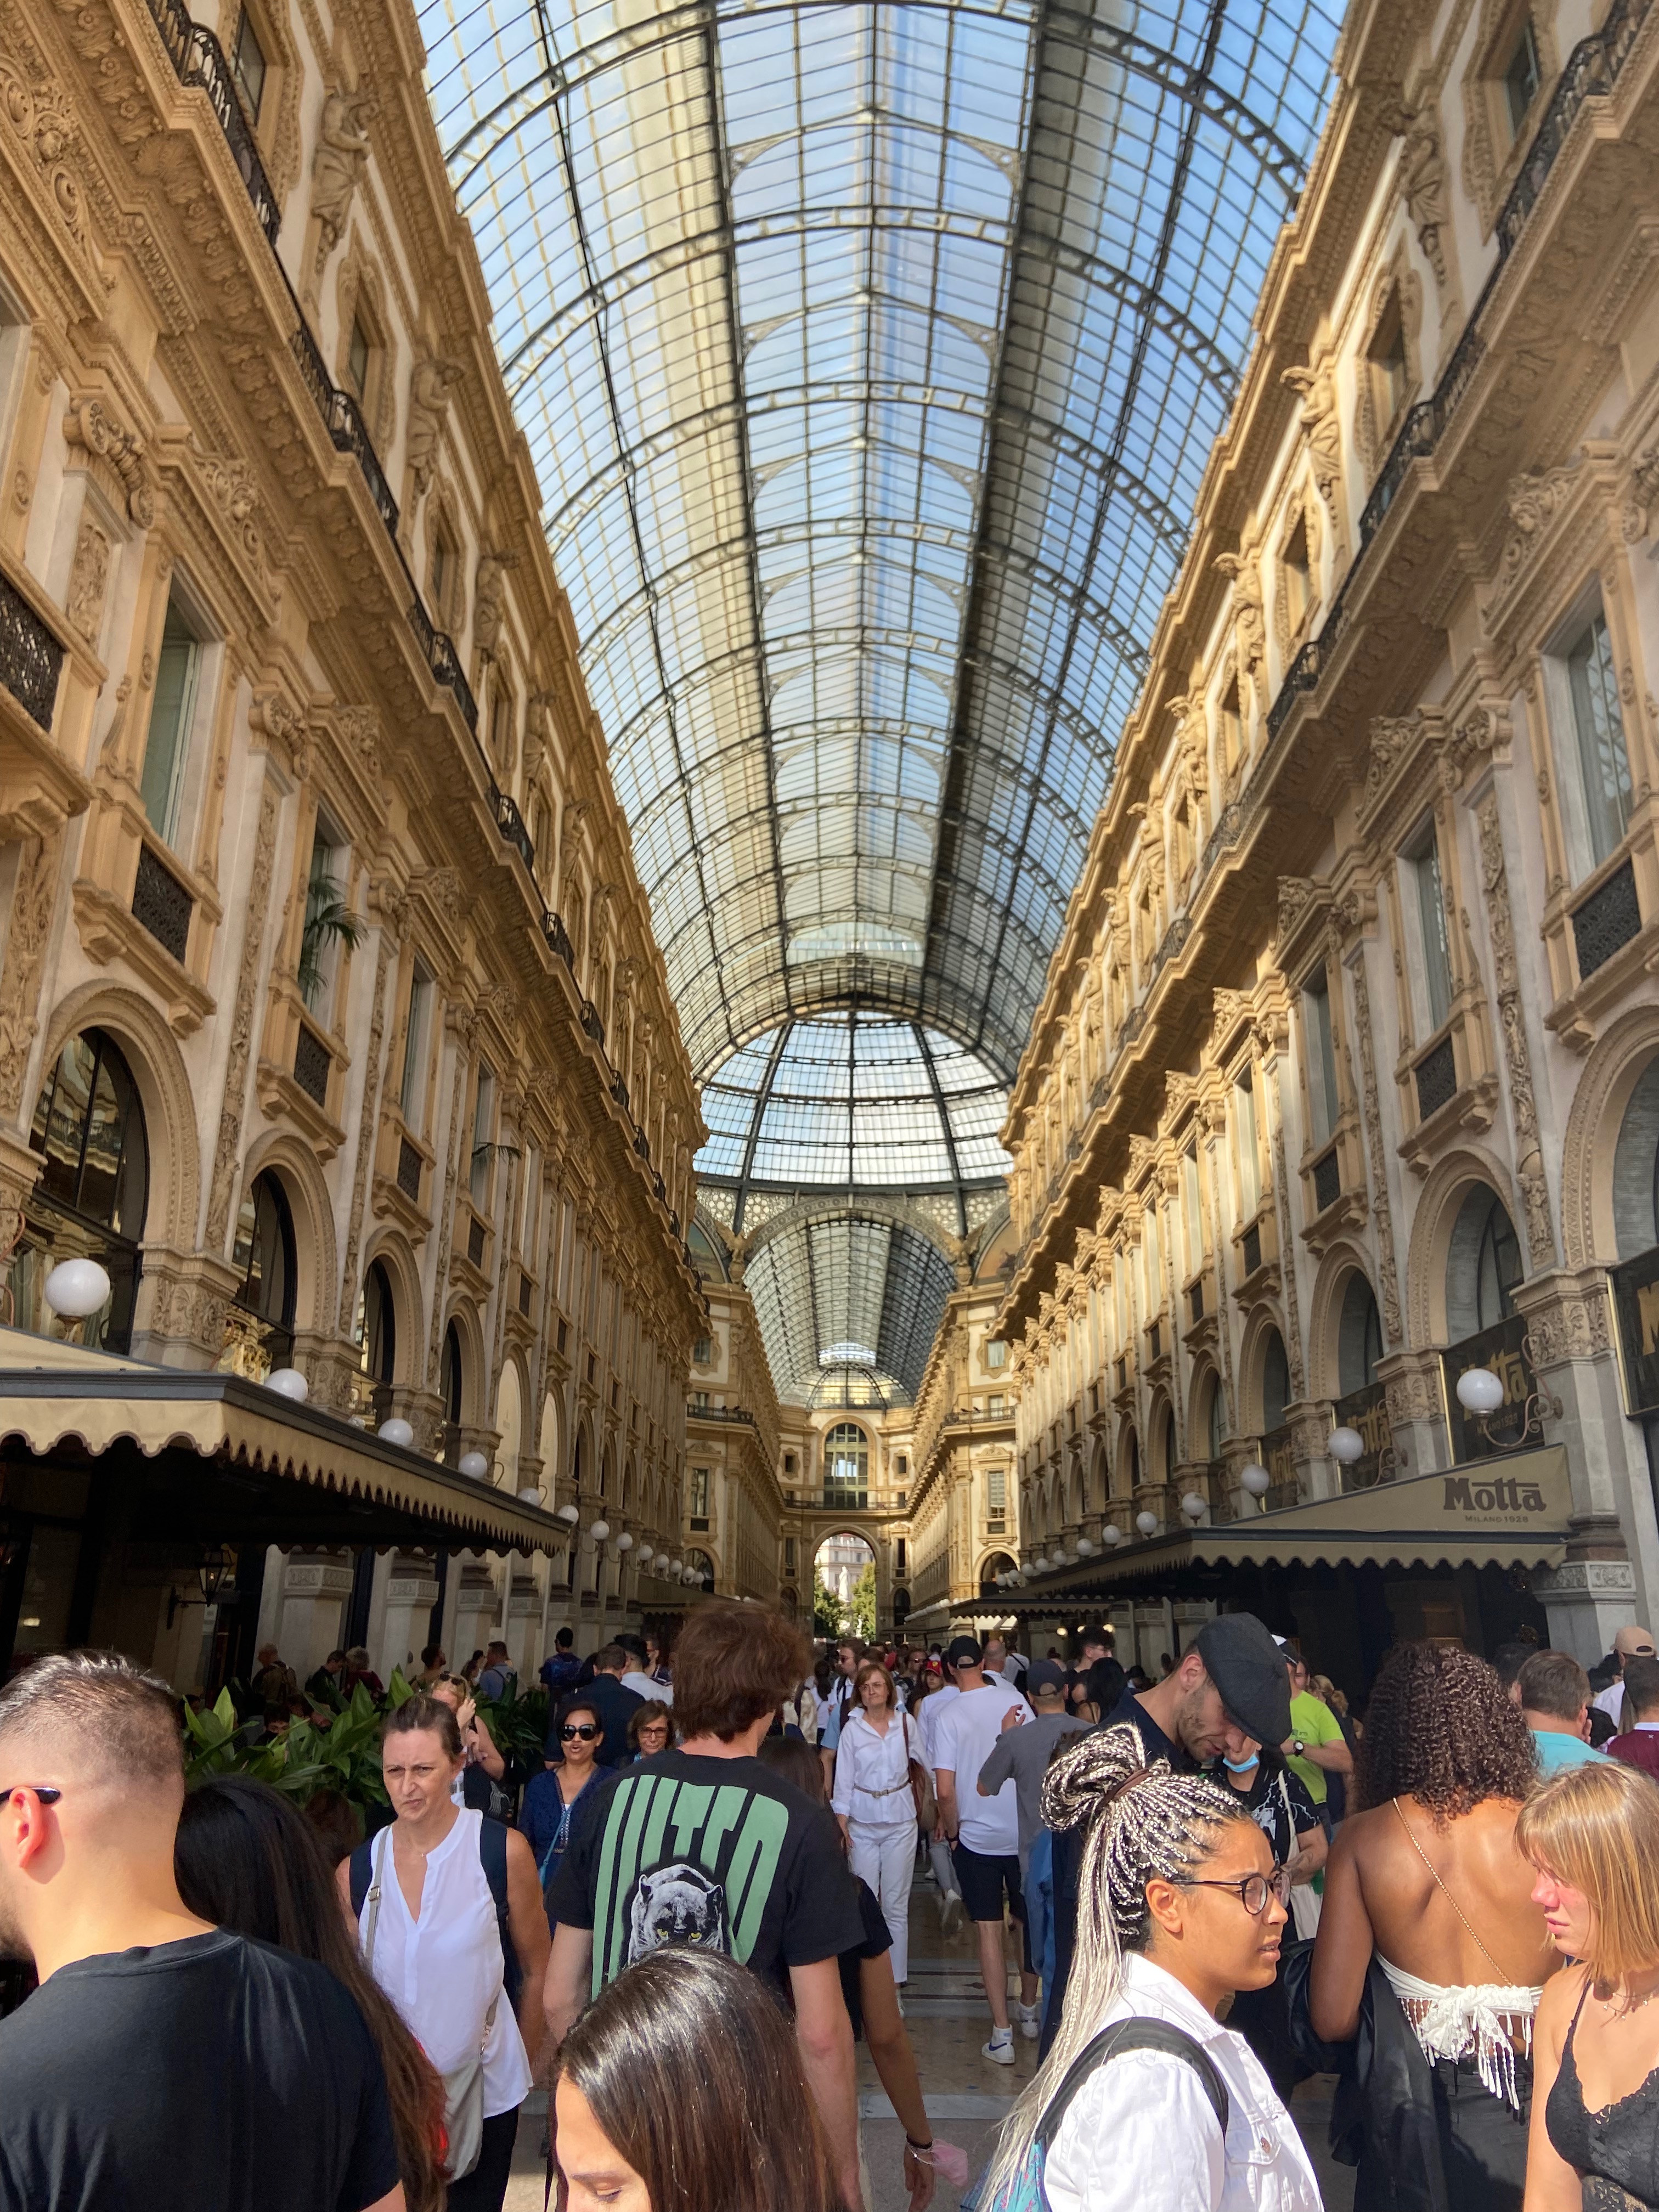 At the front of the shopping arcade.